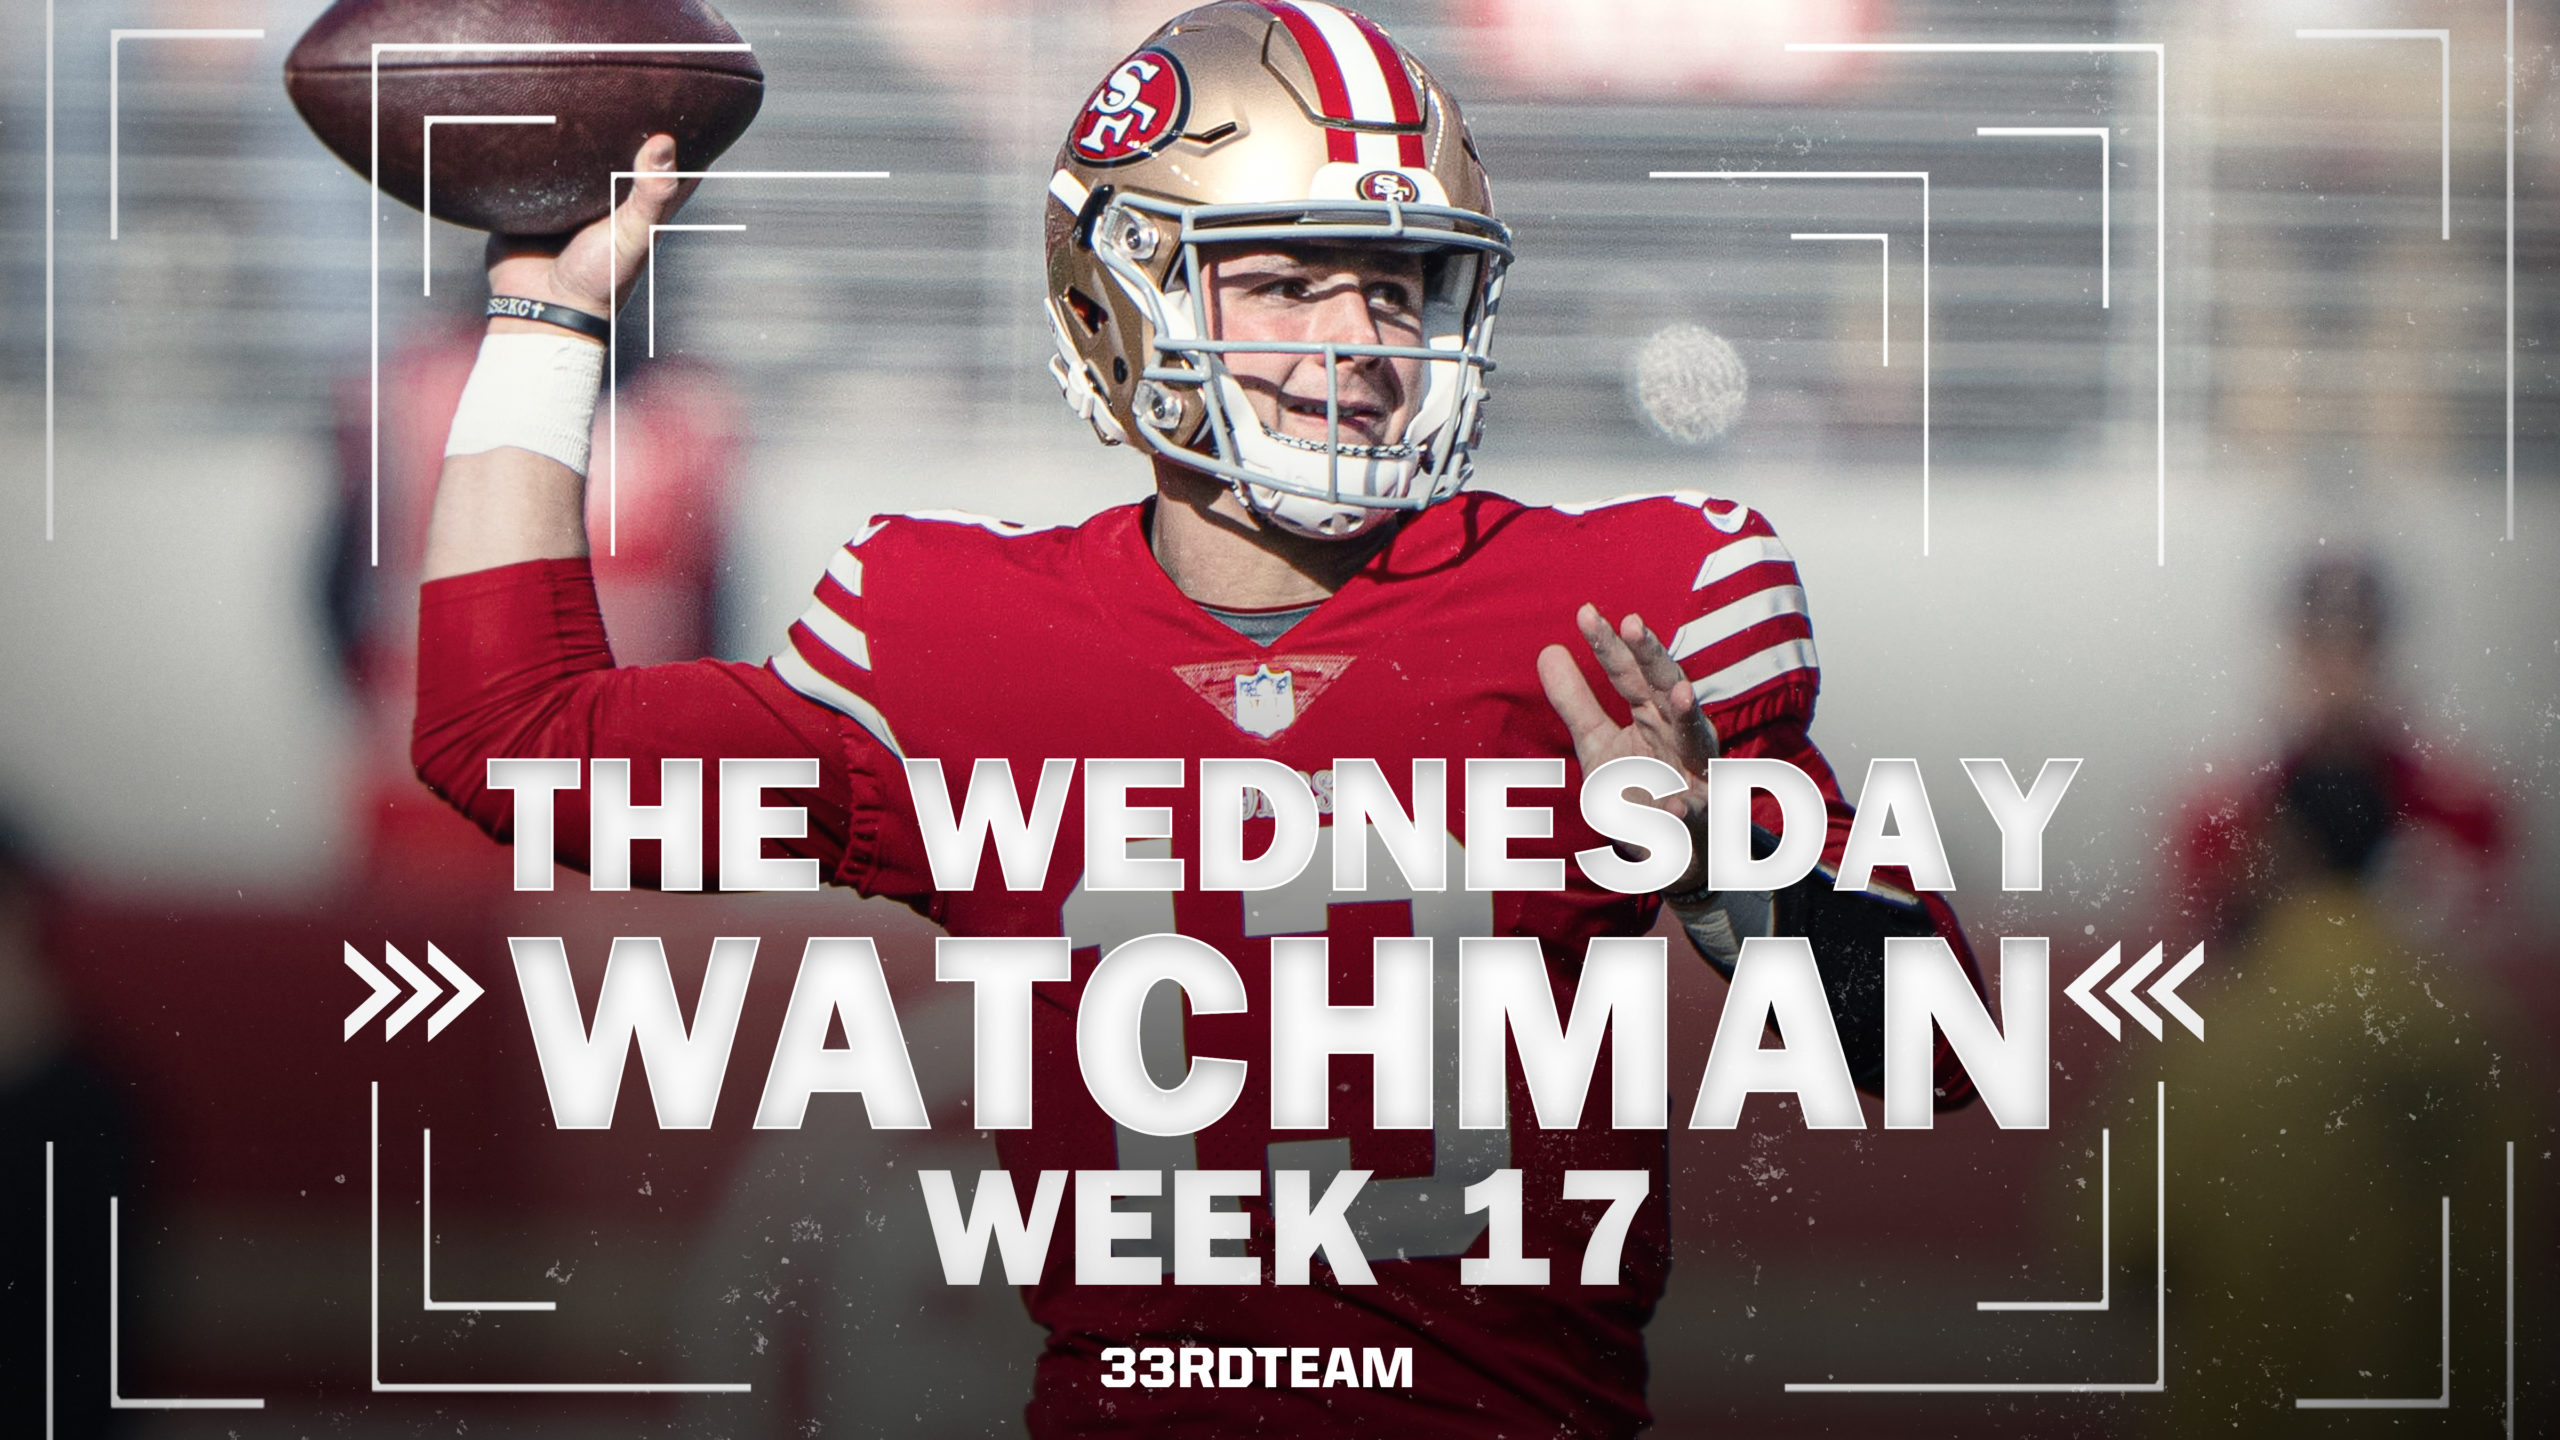 The Wednesday Watchman: NFL Week 17 Betting, DFS, Fantasy Information to Know